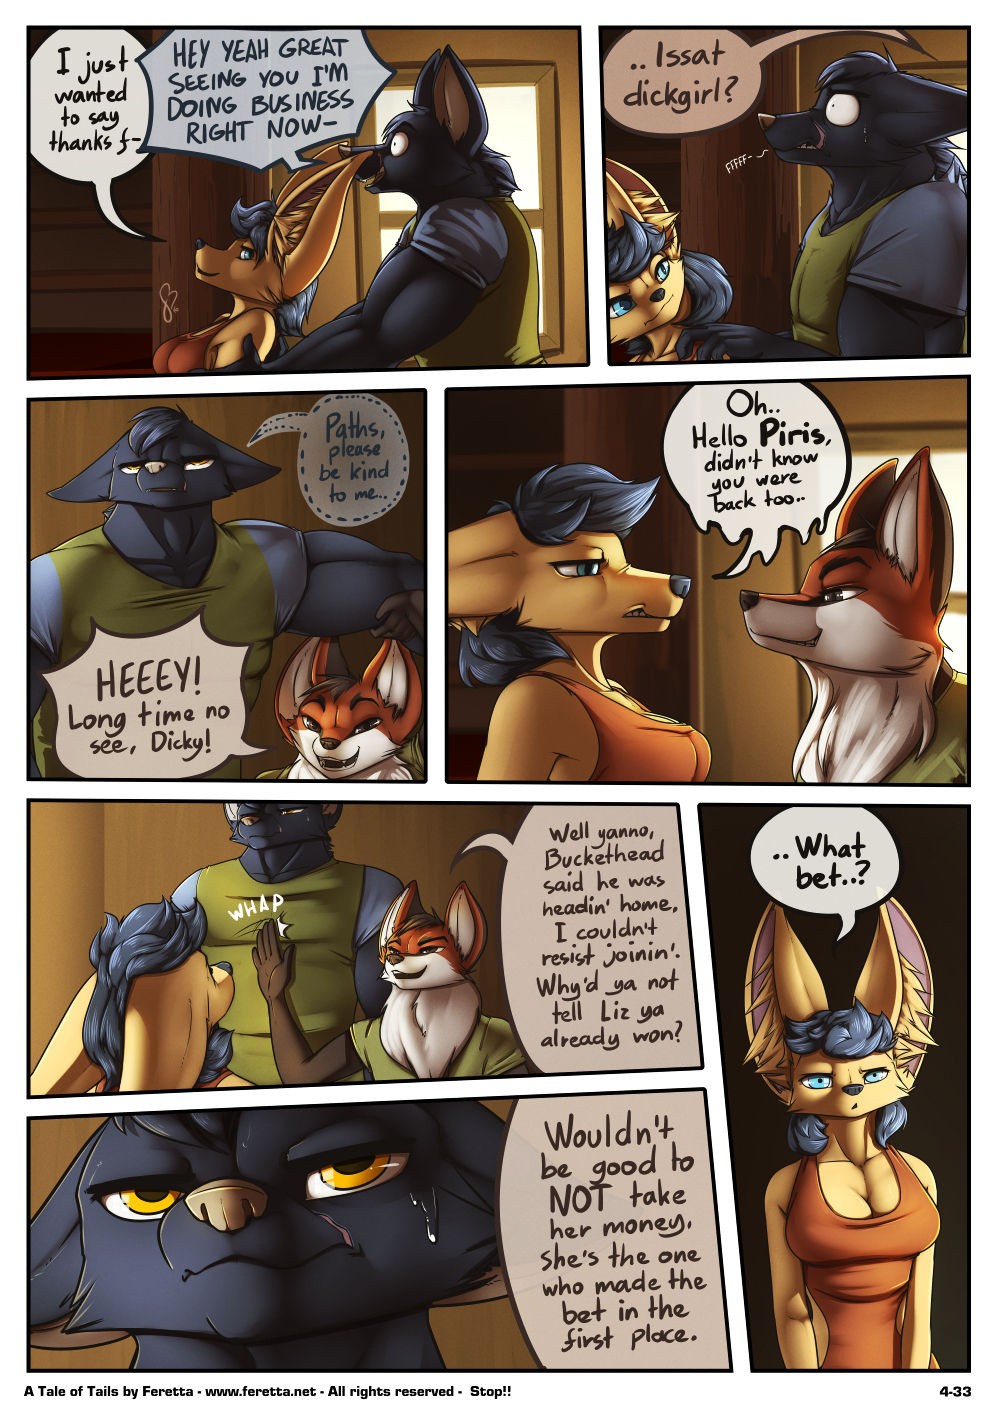 A Tale of Tails 4 - Matters of the mind porn comic picture 33